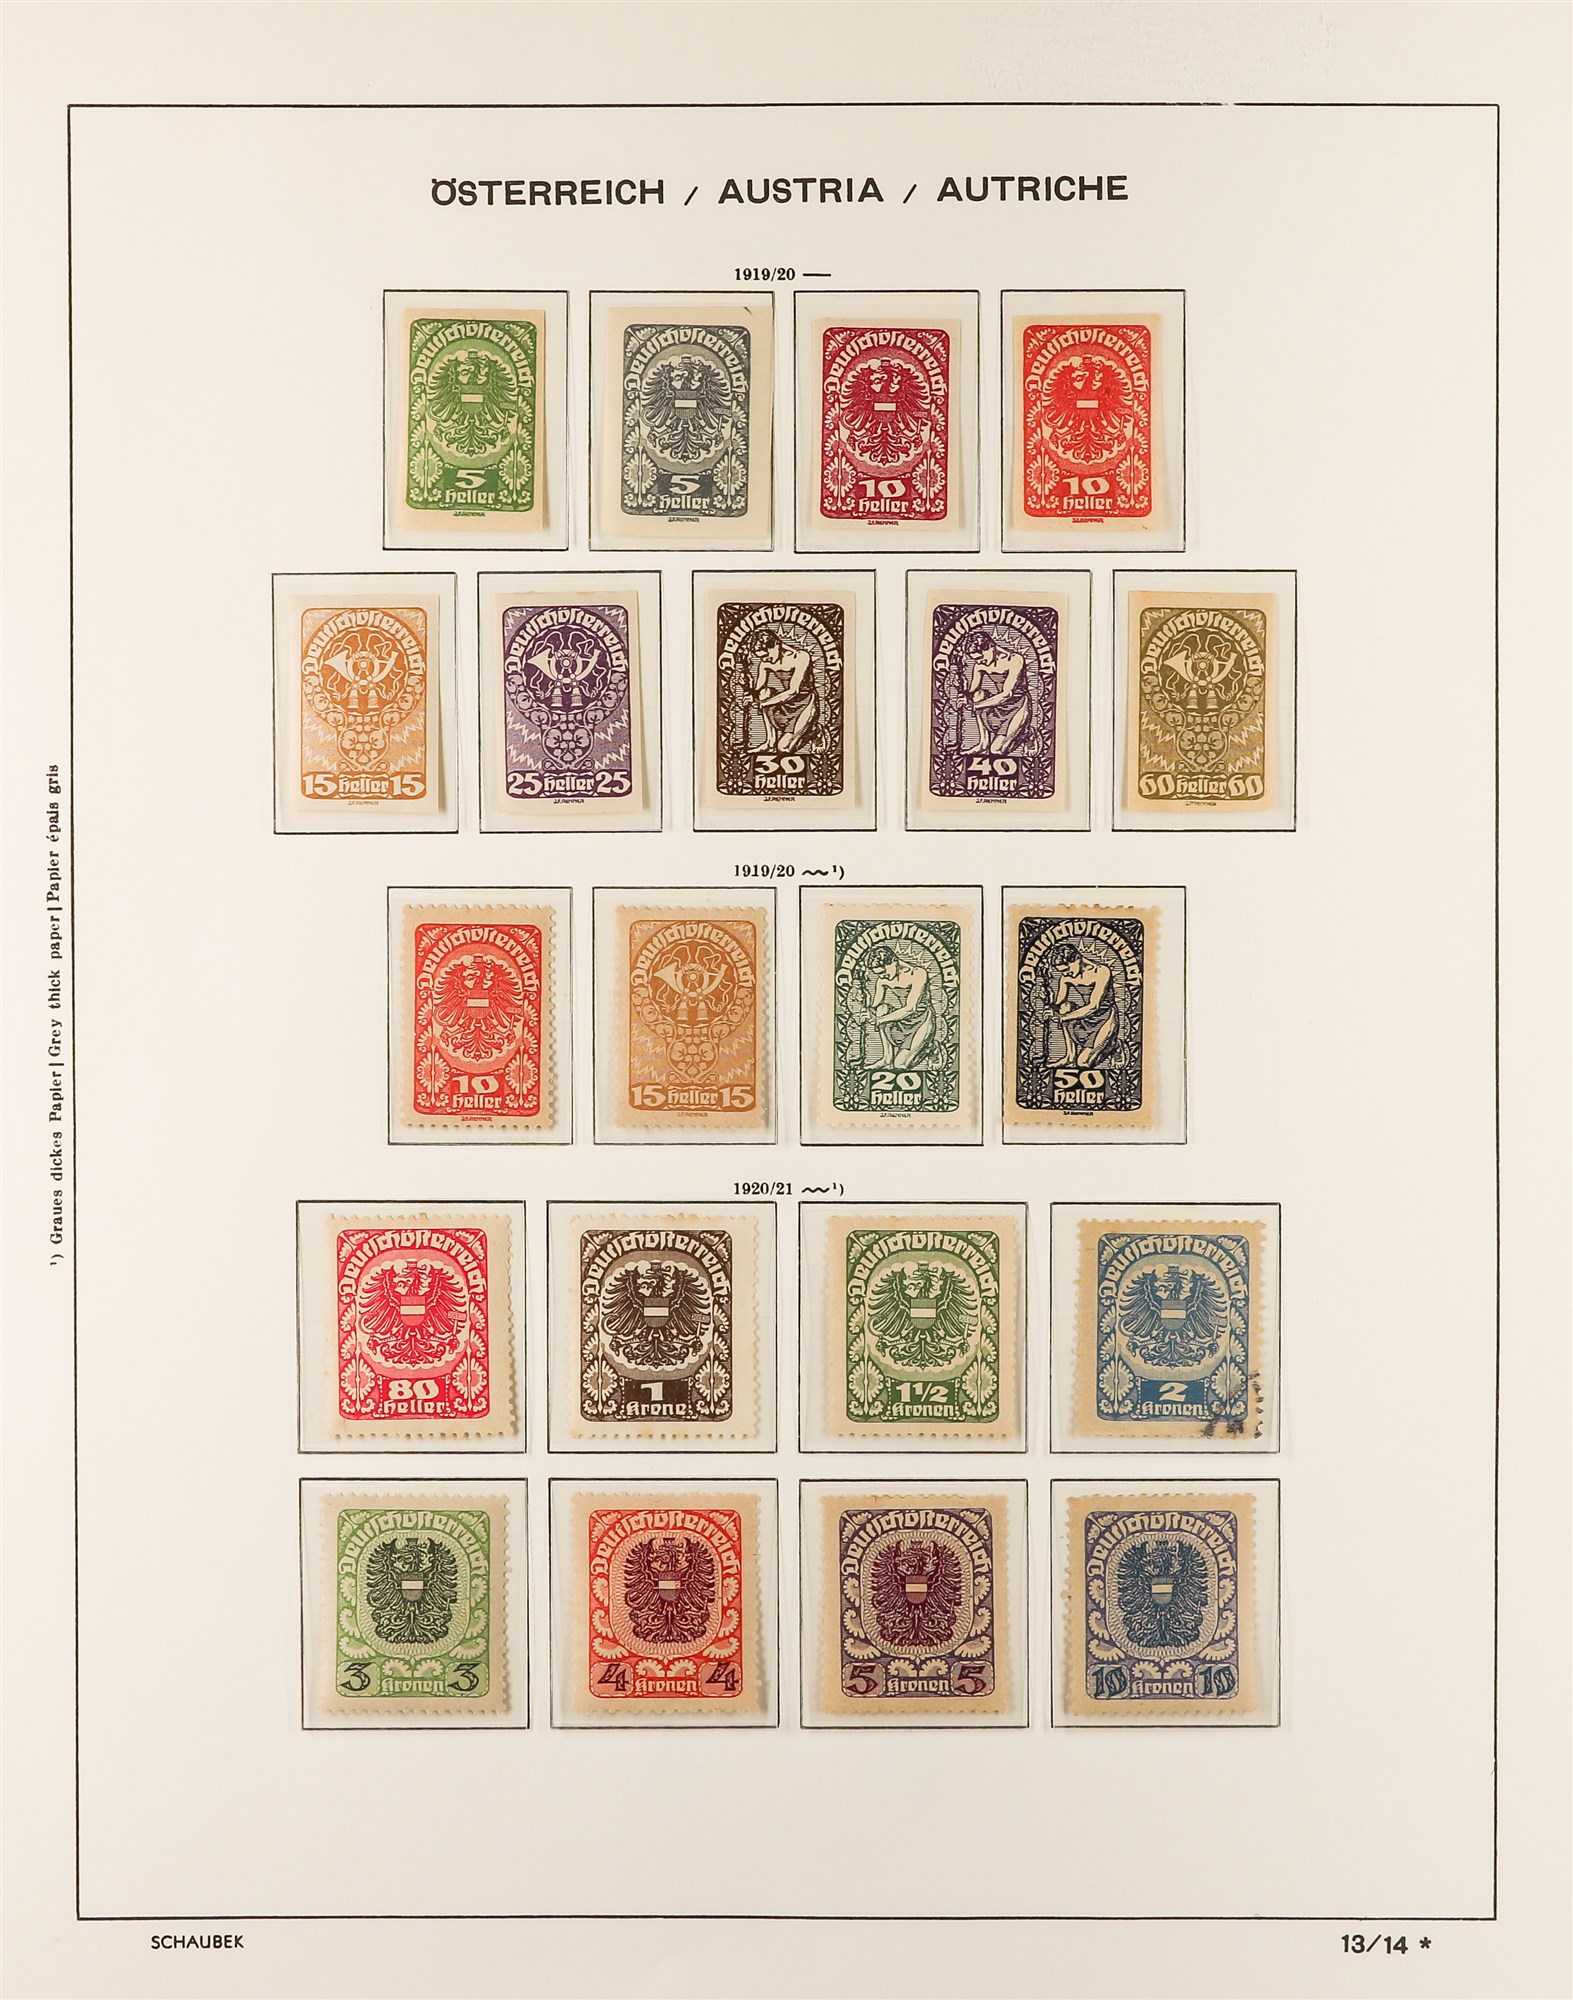 AUSTRIA 1850 - 1937 COLLECTION. of around 1000 mint & used stamps in Schaubek Austria hingeless - Image 15 of 29